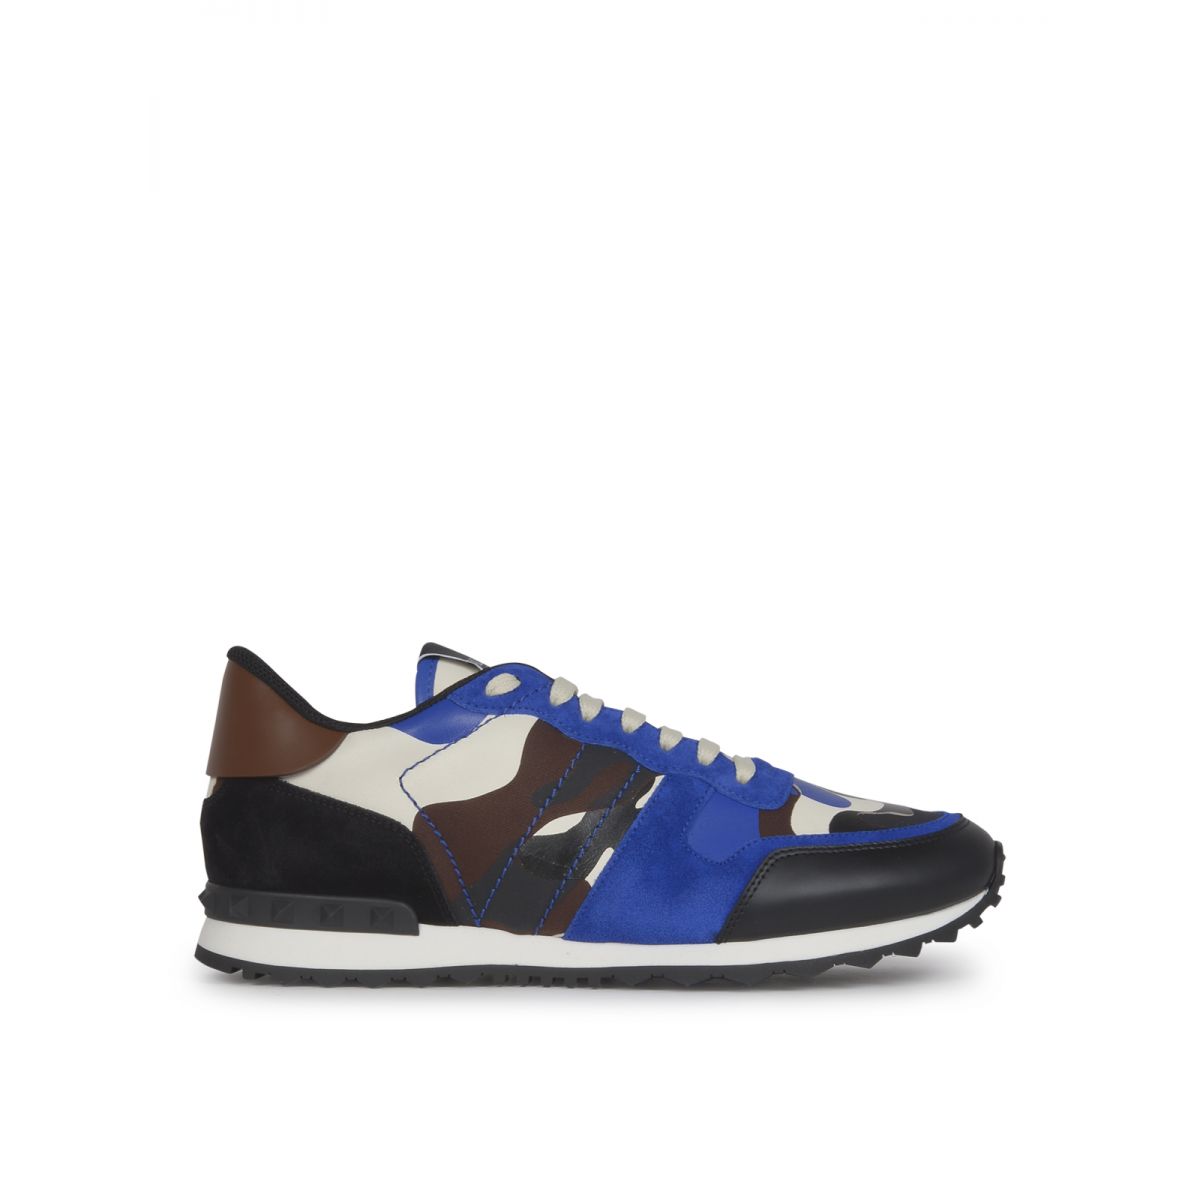 Valentino - Rockrunner Camouflage Sneakers